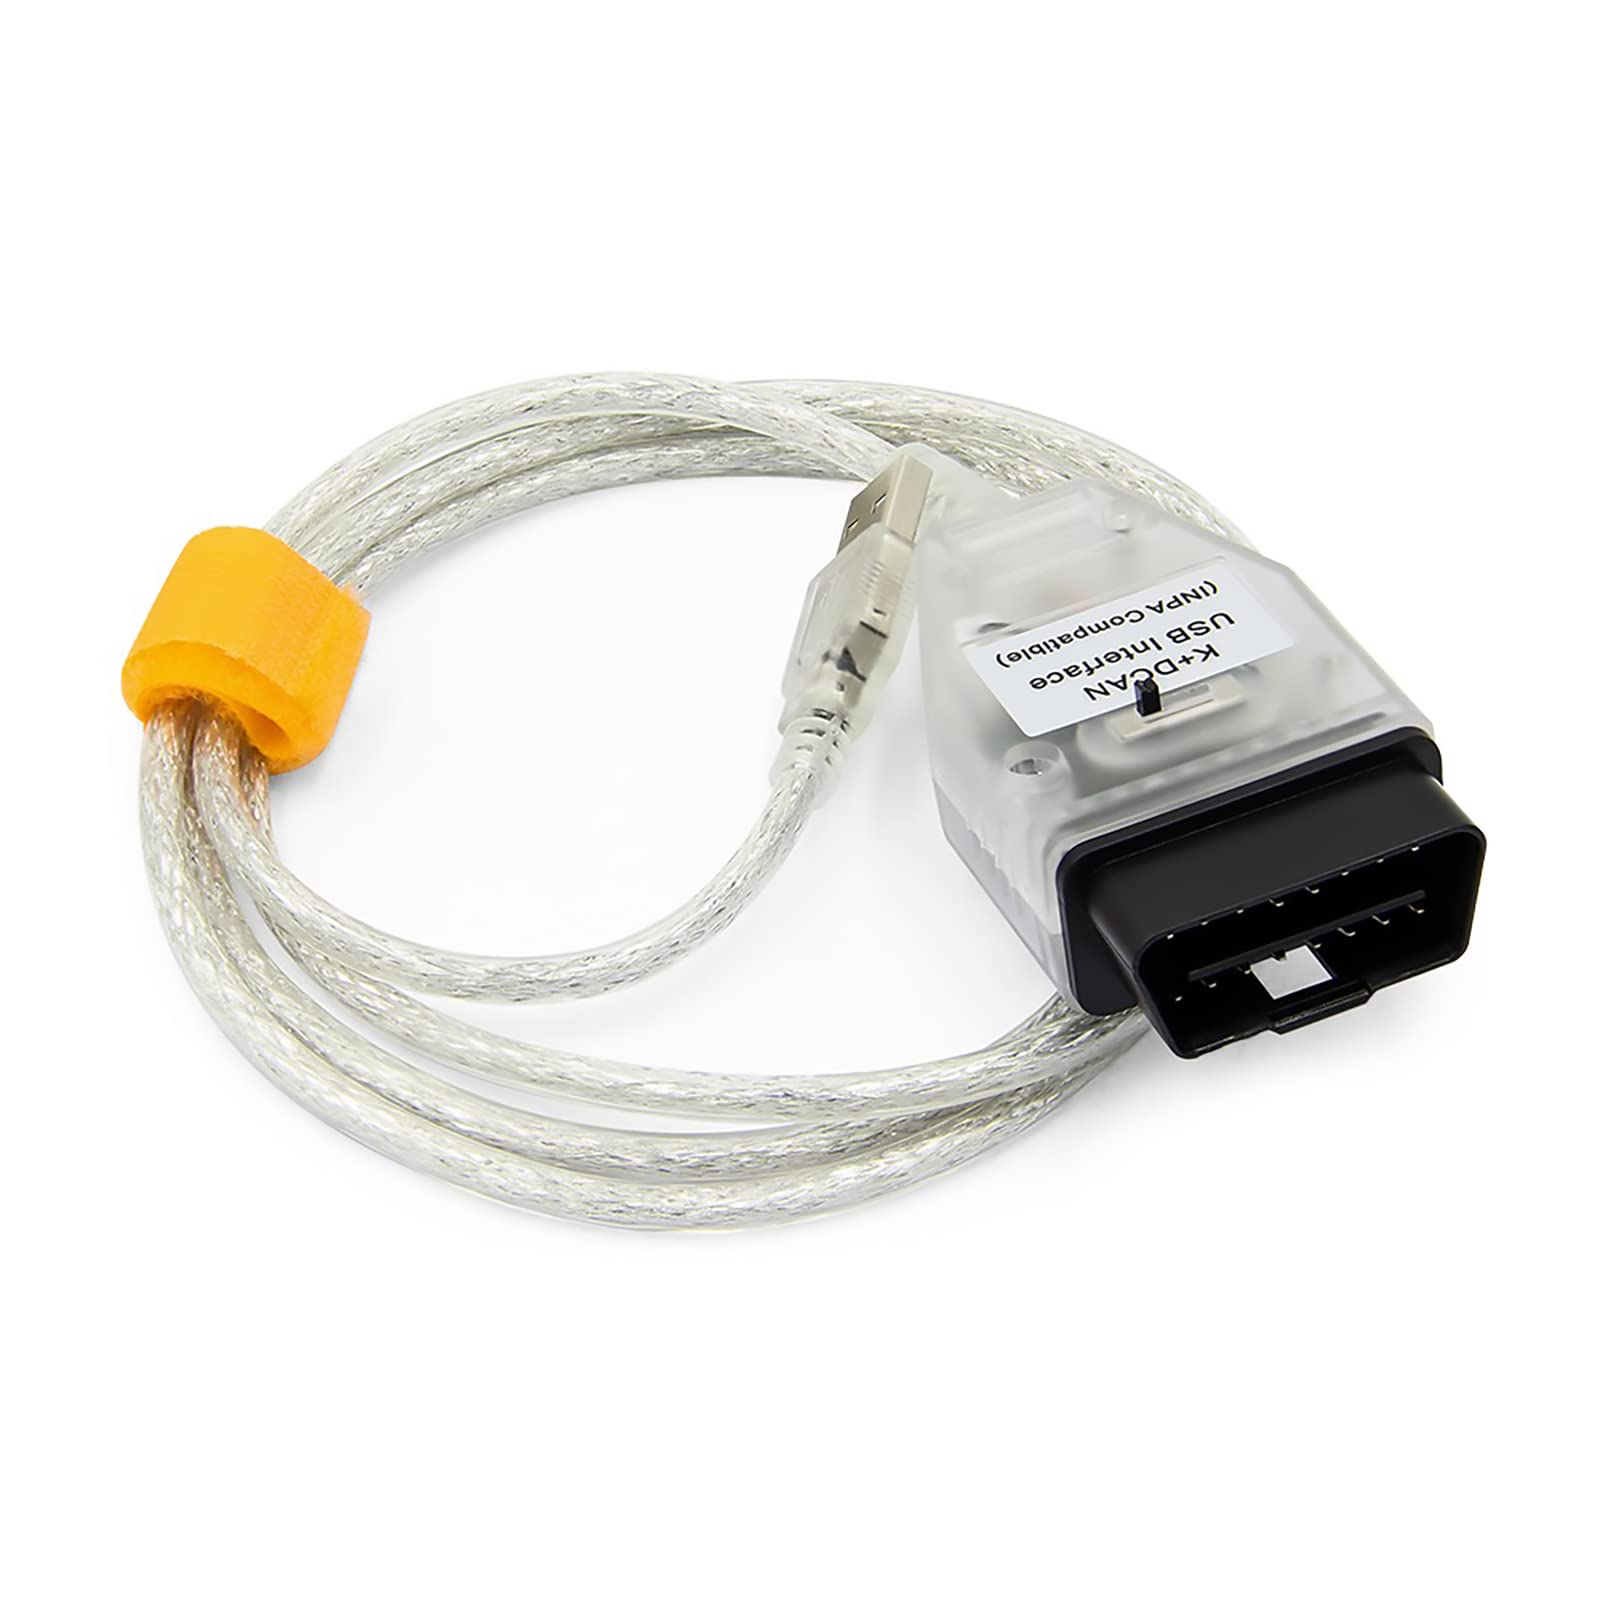 Alchiauto k d can kcan dcan cable DCAN K+Ediabas Cable Interface OBDii k-can Cable 2M compatible B M W von Alchiauto